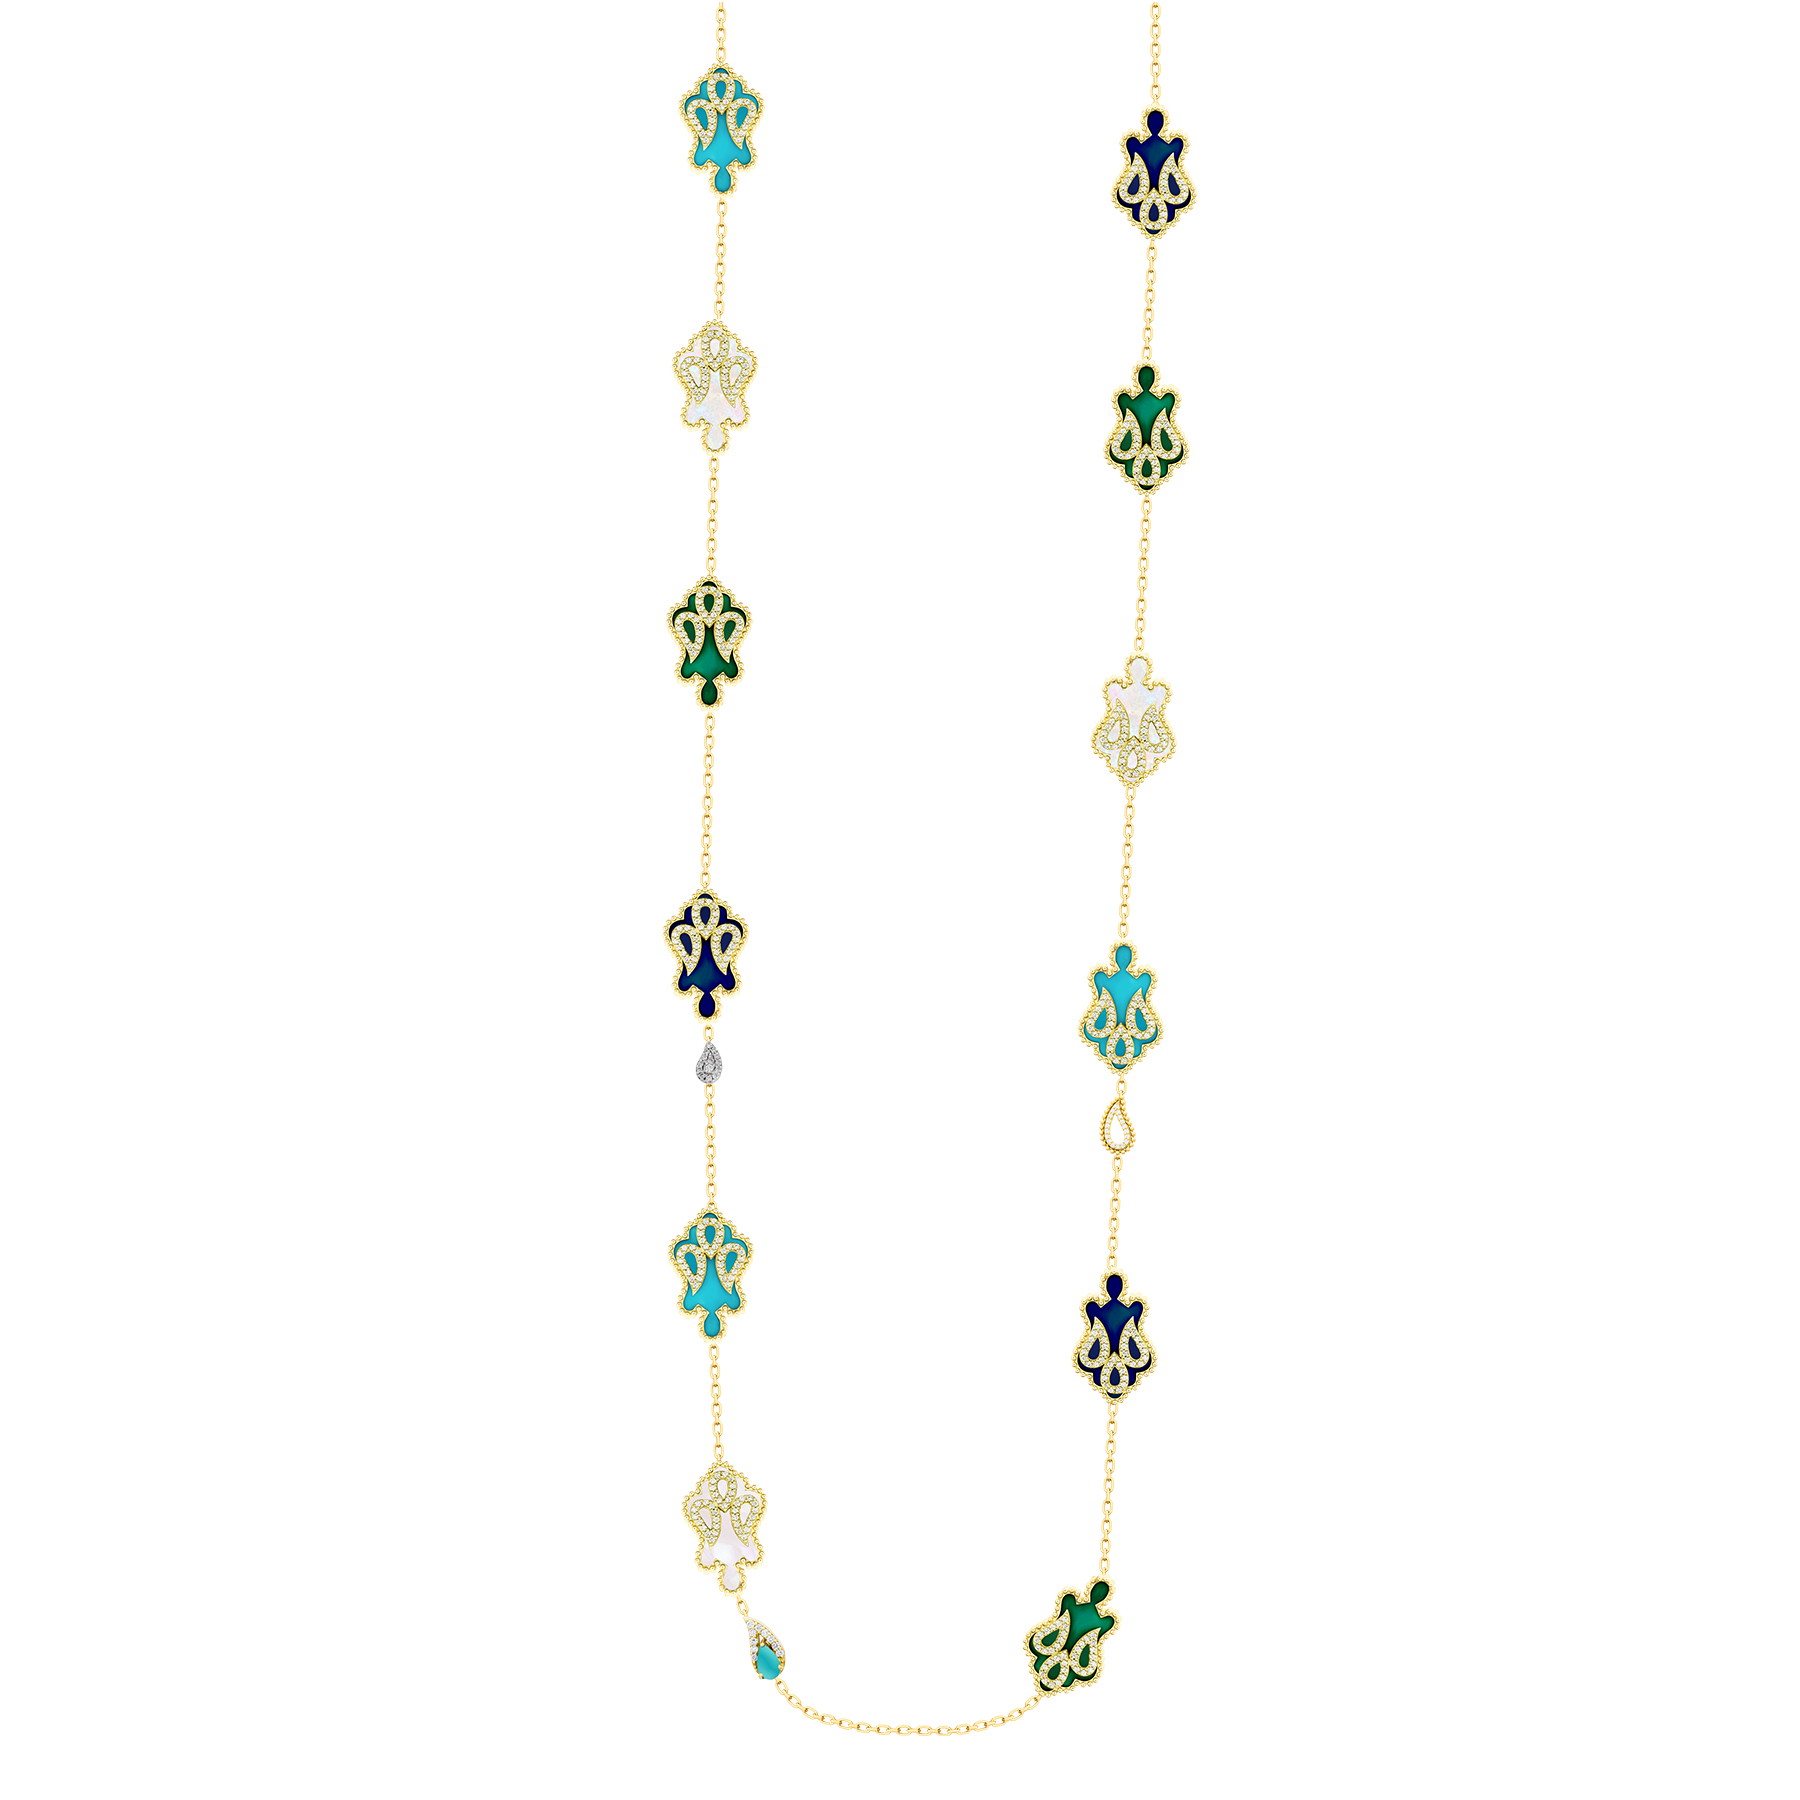 "Asala Gold, Diamond, Turquoise, Jade, Pearl, Lapiz, and Opal Long Necklace "